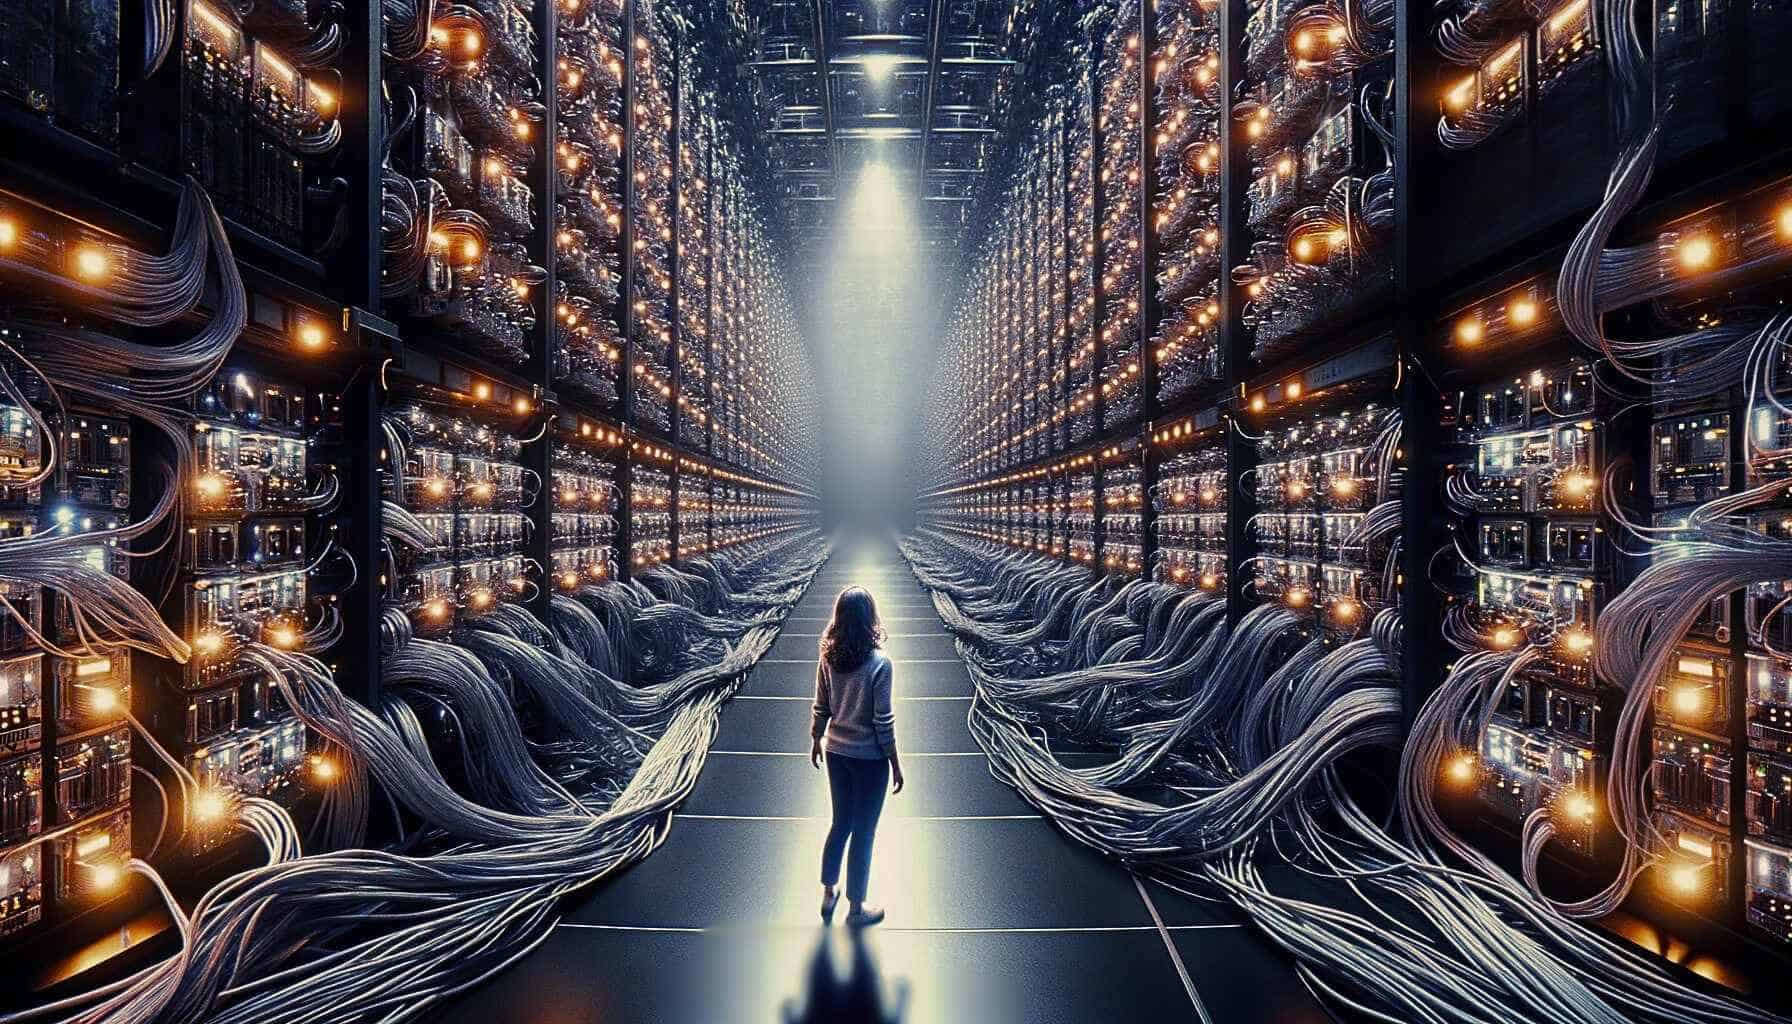 A silhouette of a woman is visible as she stands in a warehouse basement, surrounded by a thousand processors wired together into a massive computing grid.